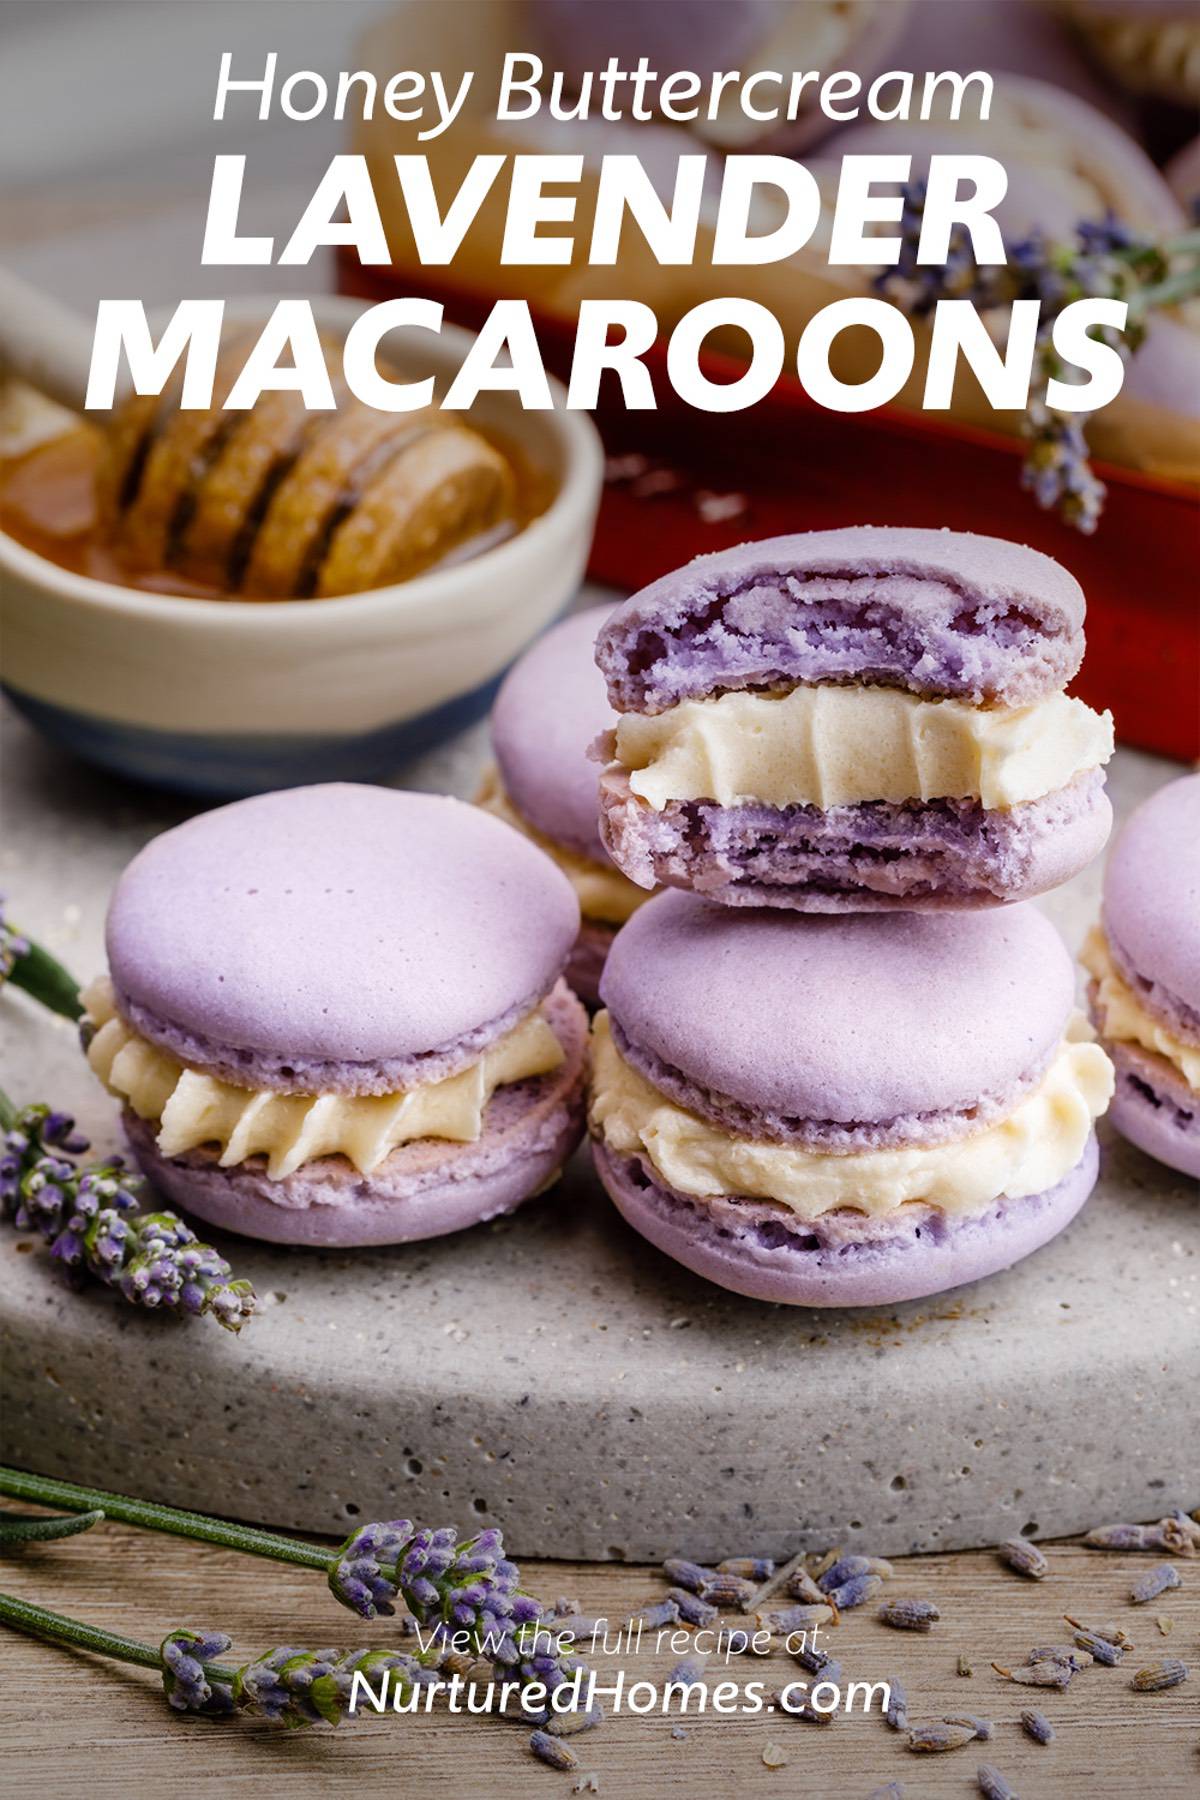 Incredible Lavender Macarons with Homemade Honey Buttercream